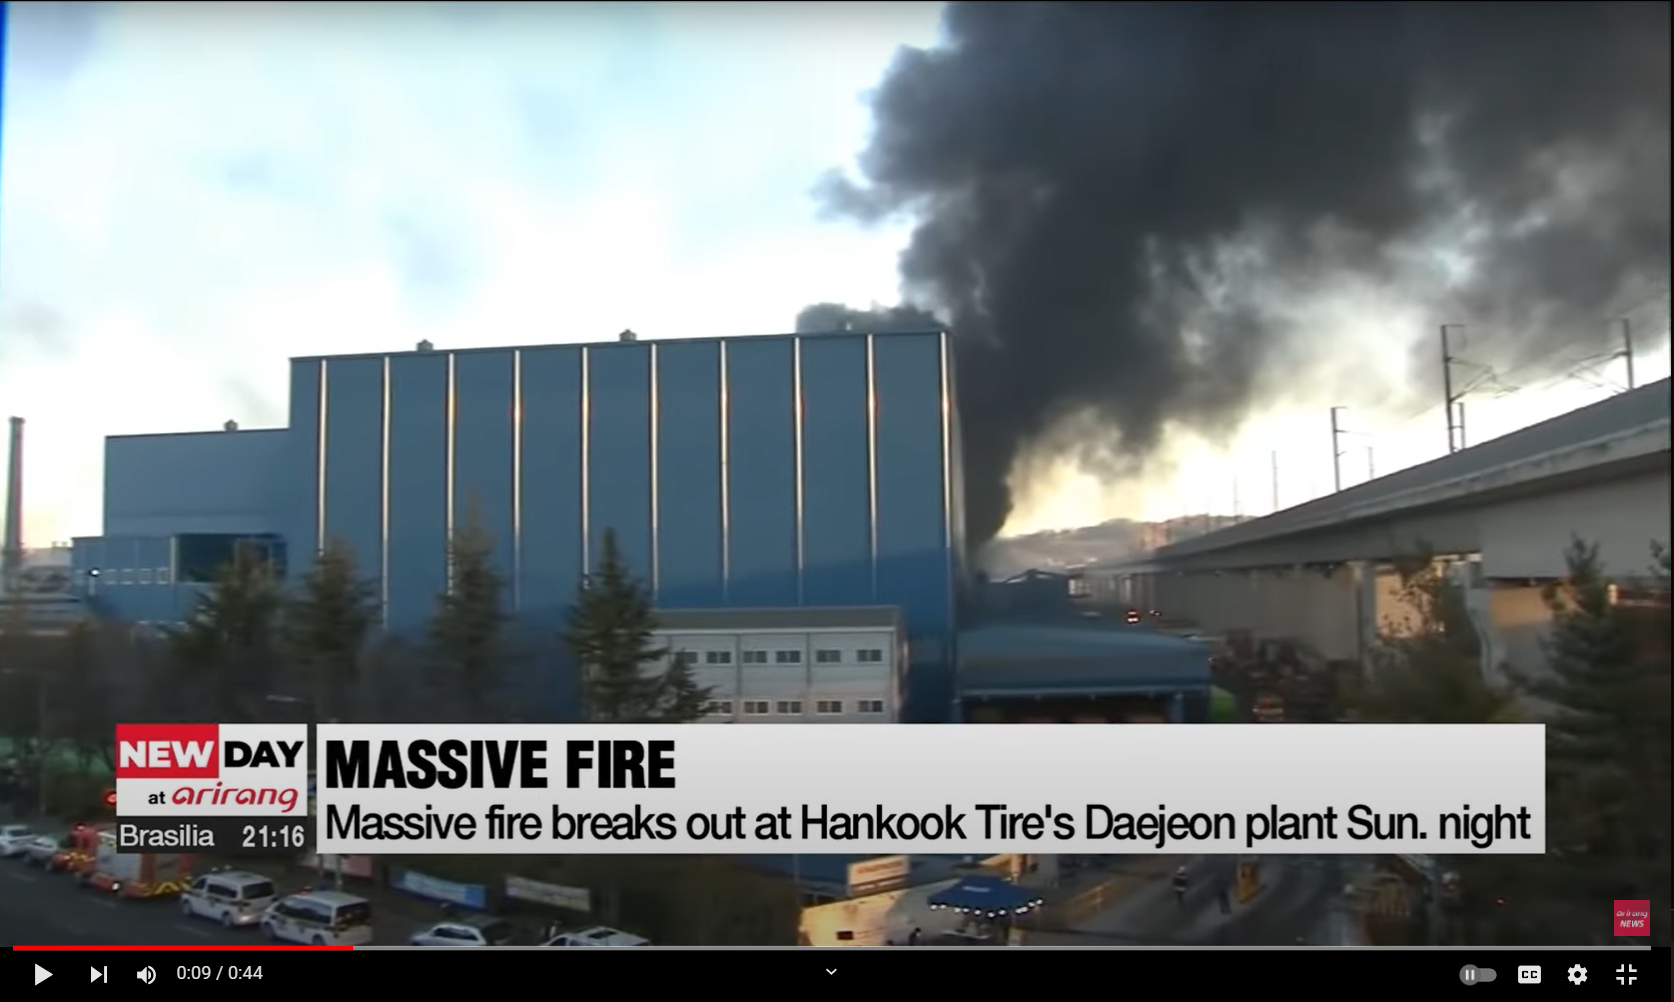 Hankook Tire halts production after “huge” fire at Daejeon plant